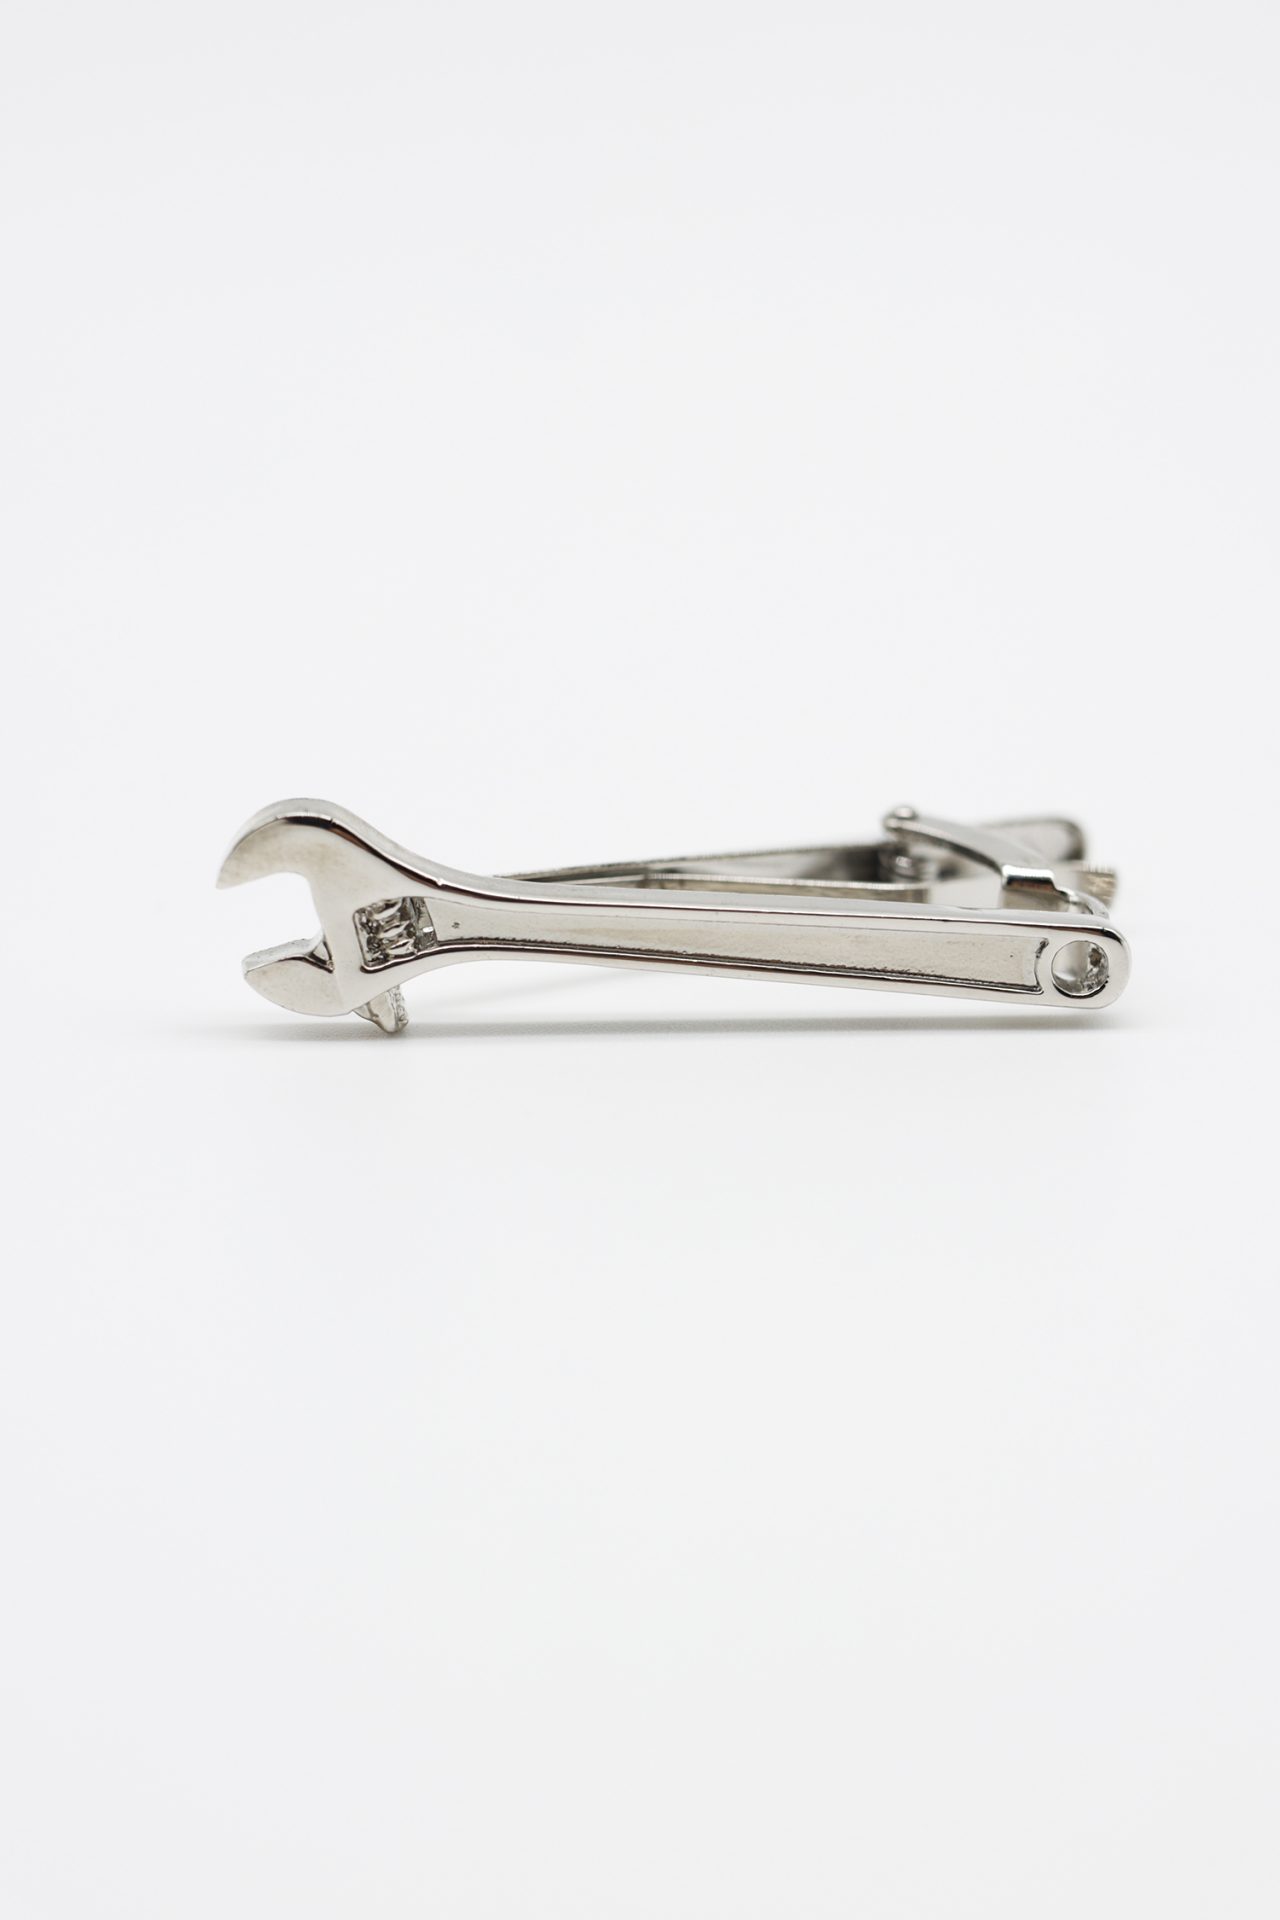 silver wrench tie clip dgrie